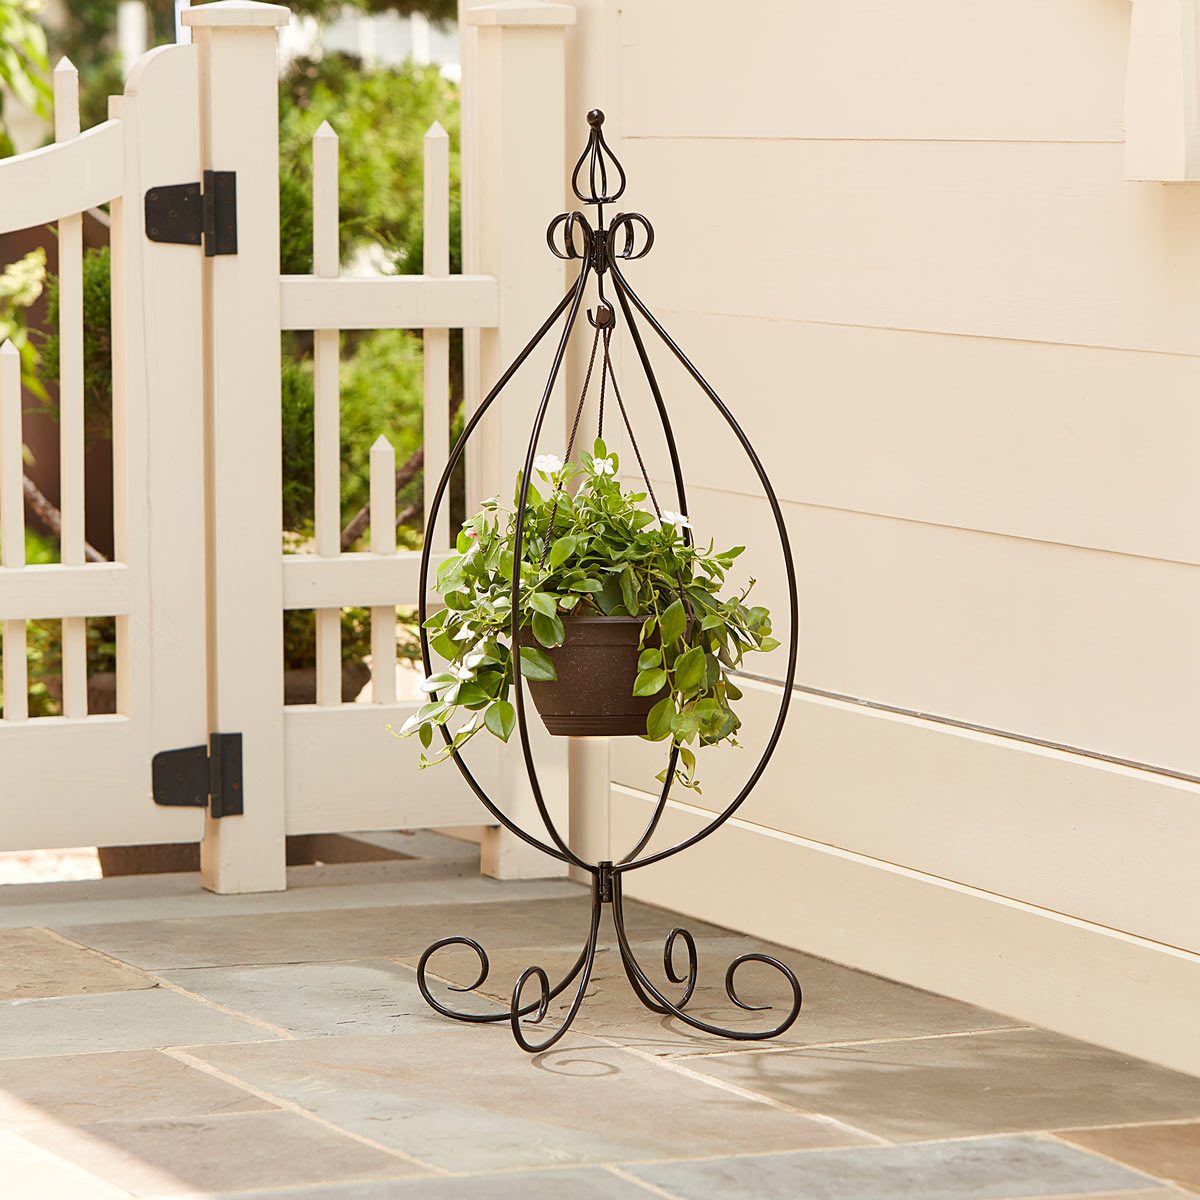 S Shaped Iron Hanging Plant Stand Holder for Landscaping Garden Decor Black 